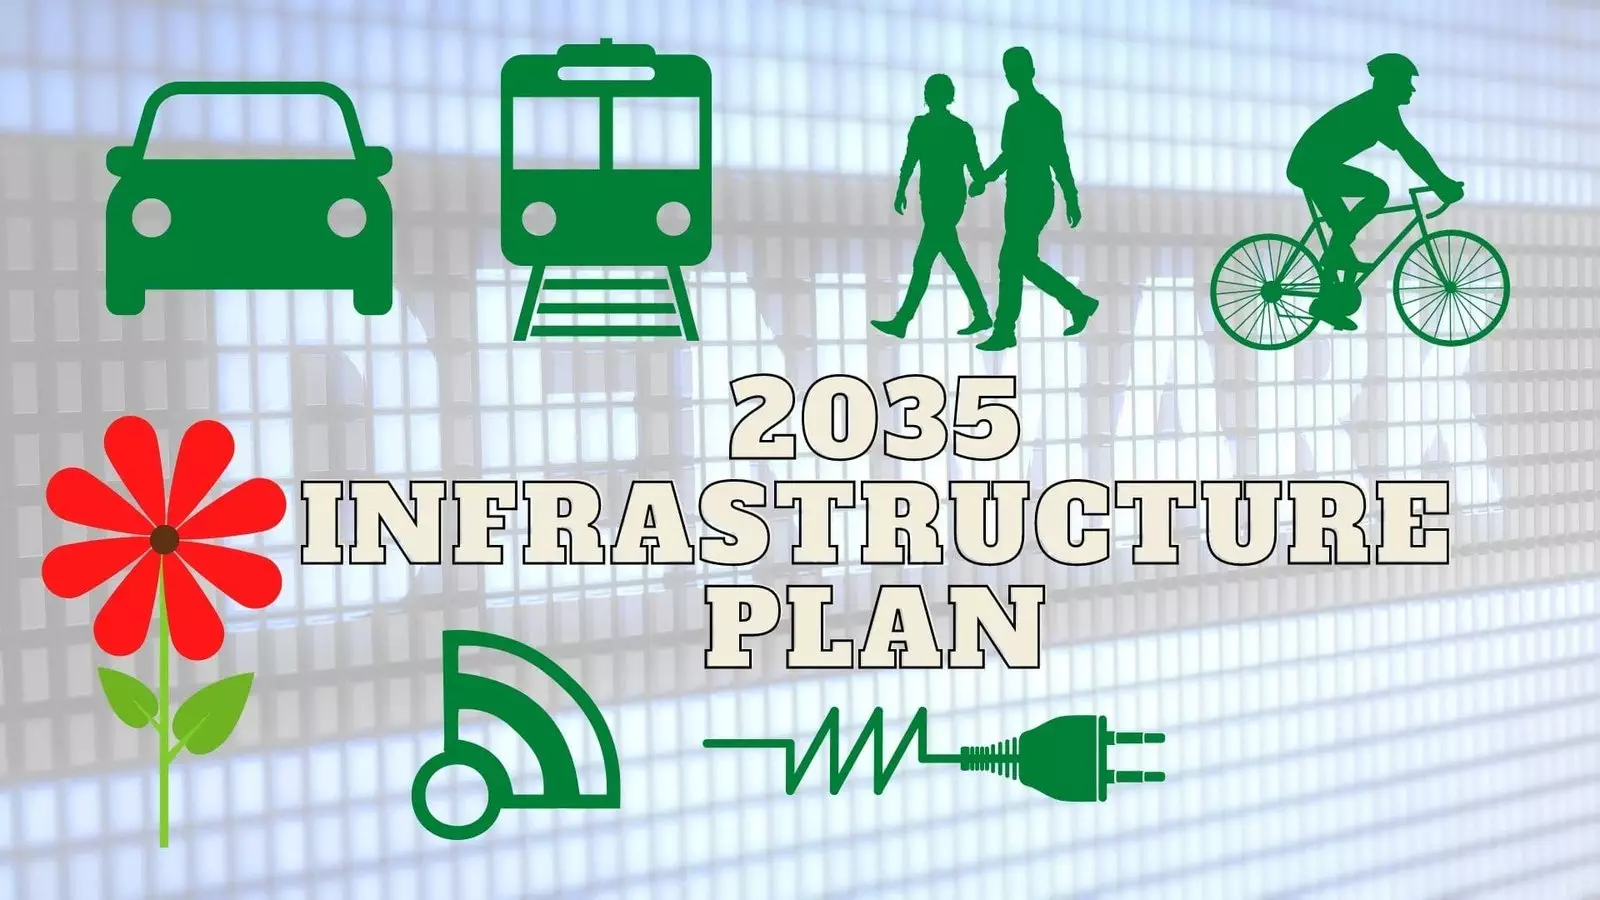 New Infrastructure plan by the Denmark government until 2035